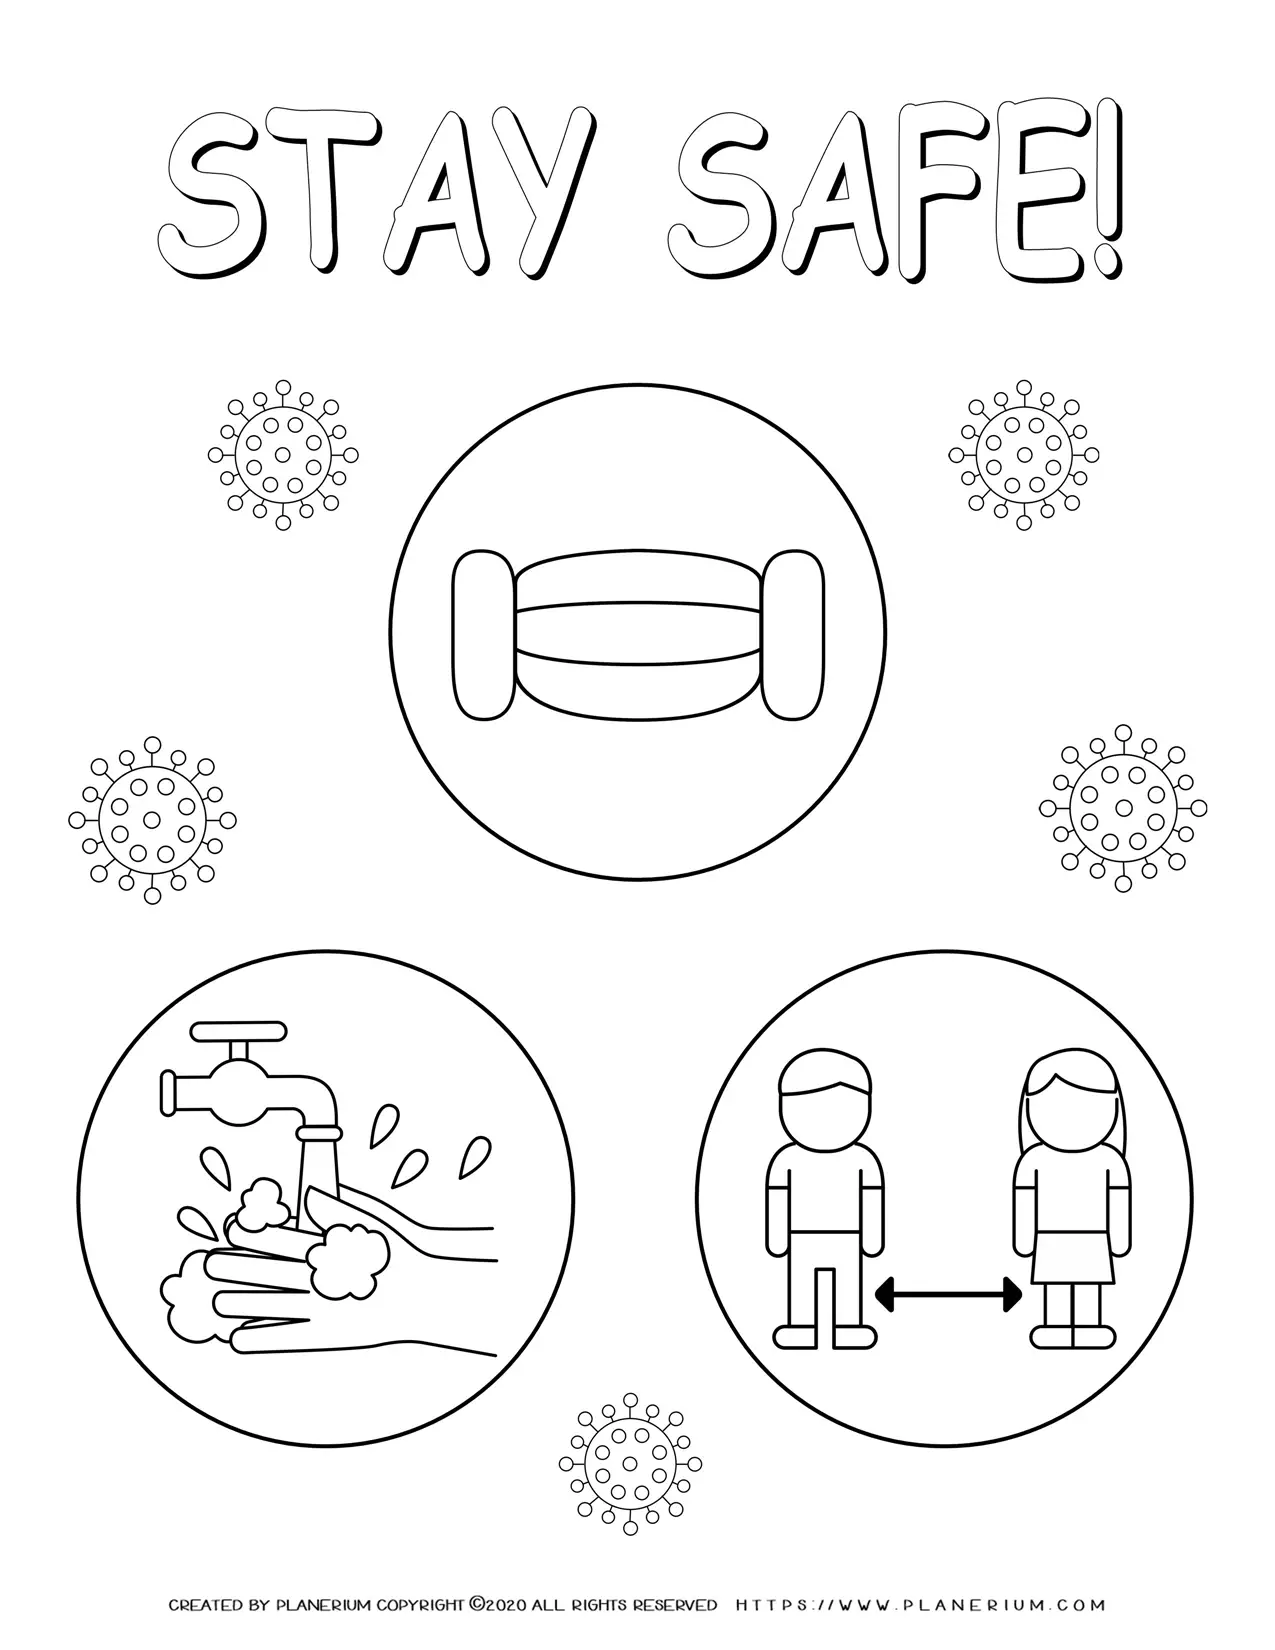 Stay Safe - Coloring Page | Planerium